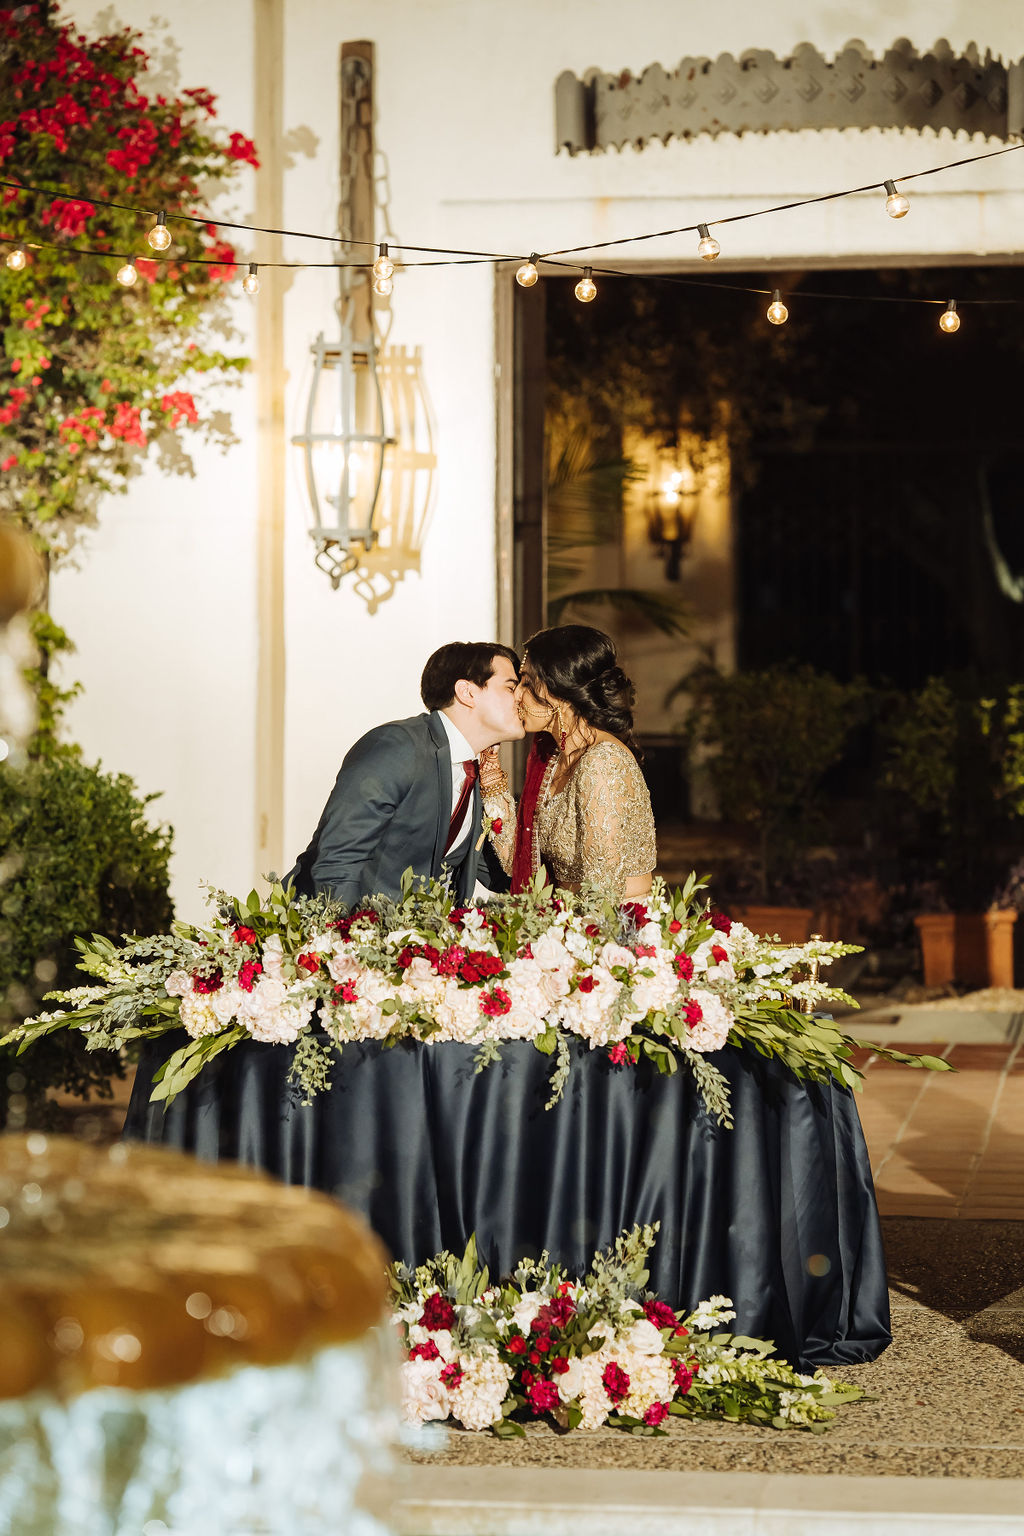 bride in embellished gold wedding saree with groom in dark grey suit and maroon tie kiss at the sweetheart table with silky black table cloth and large maroon floral arrangement